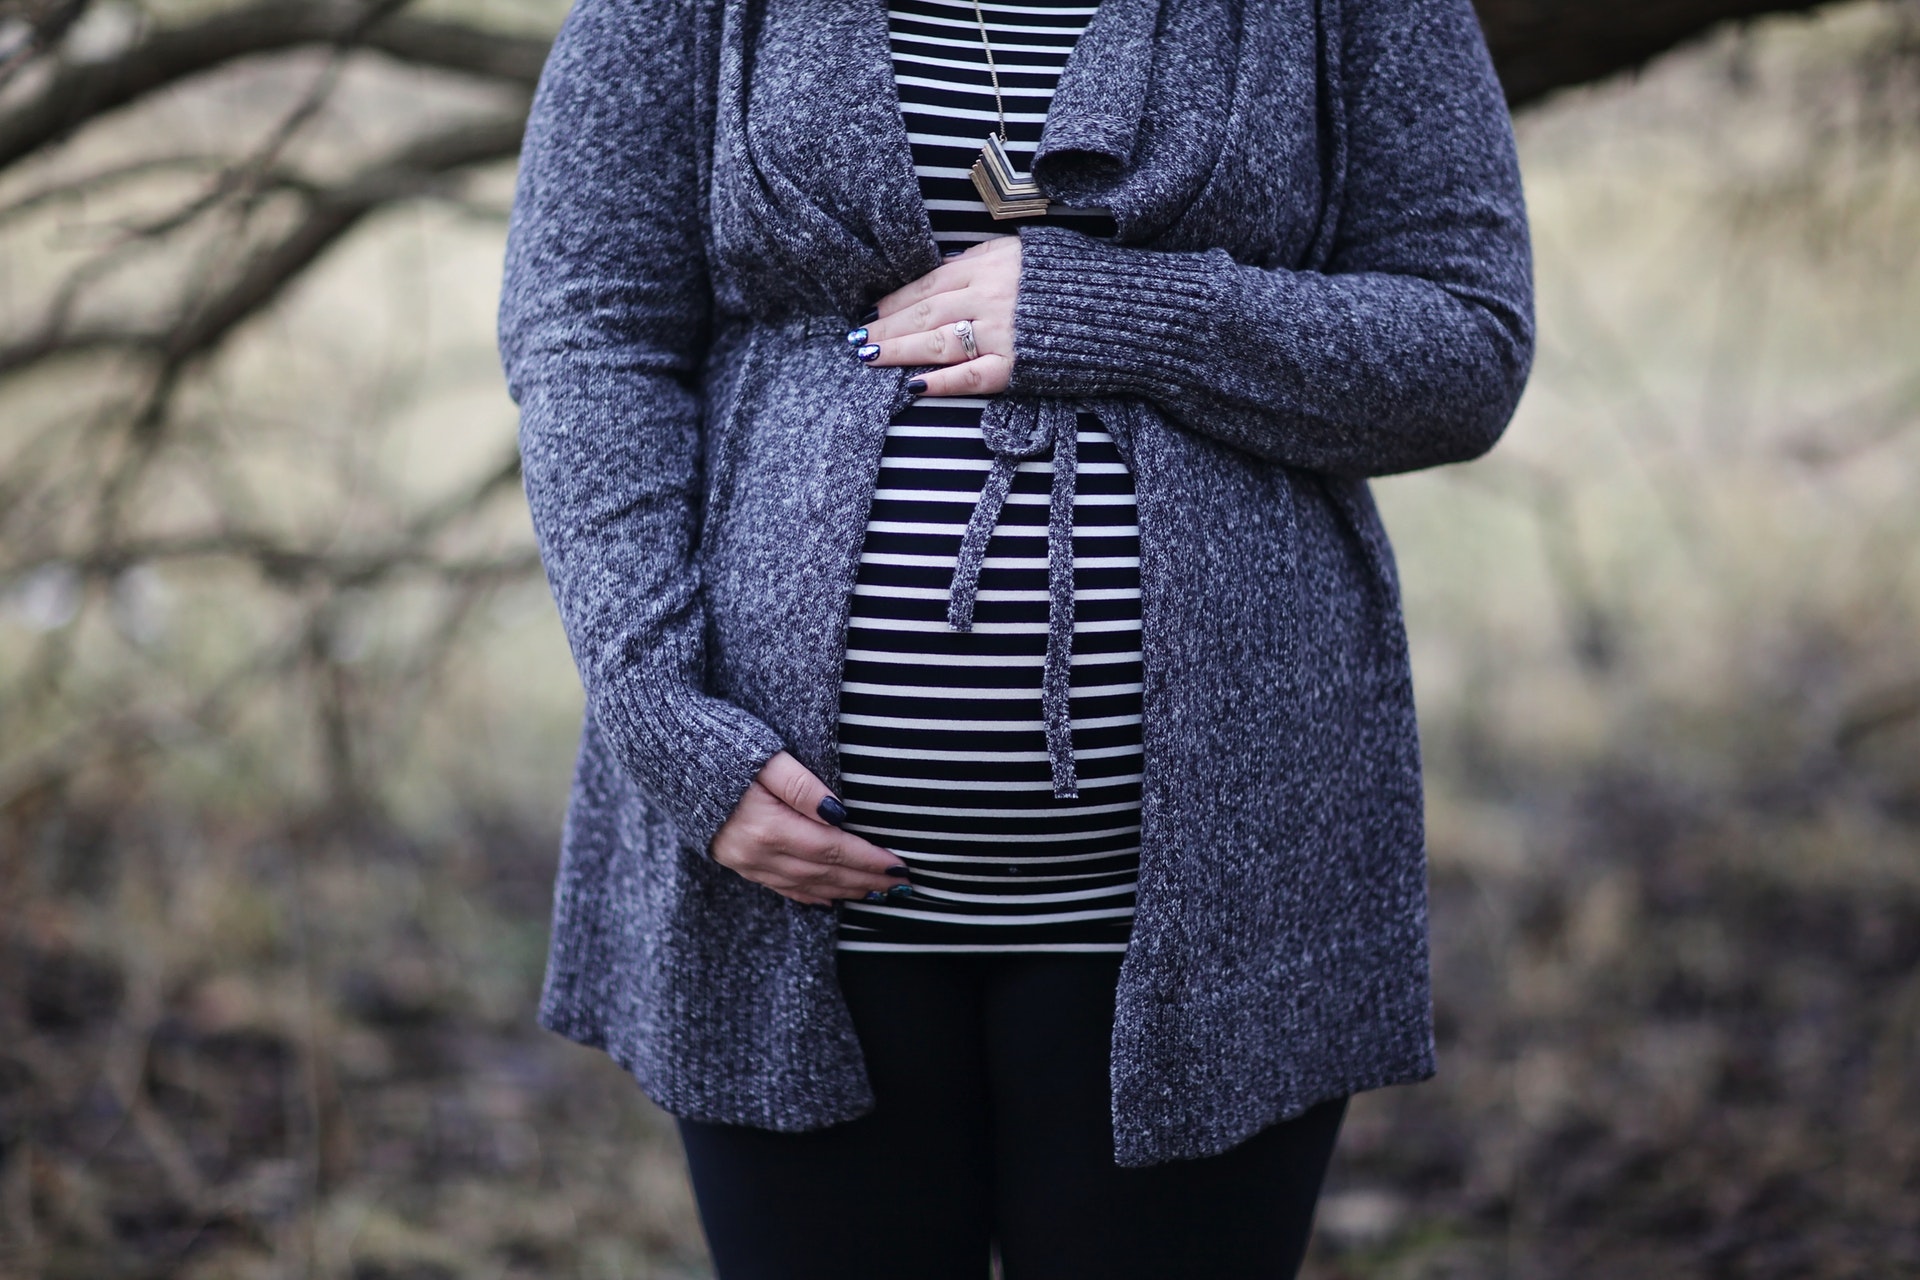 A woman's pregnant belly in a striped shirt and grey cardigan